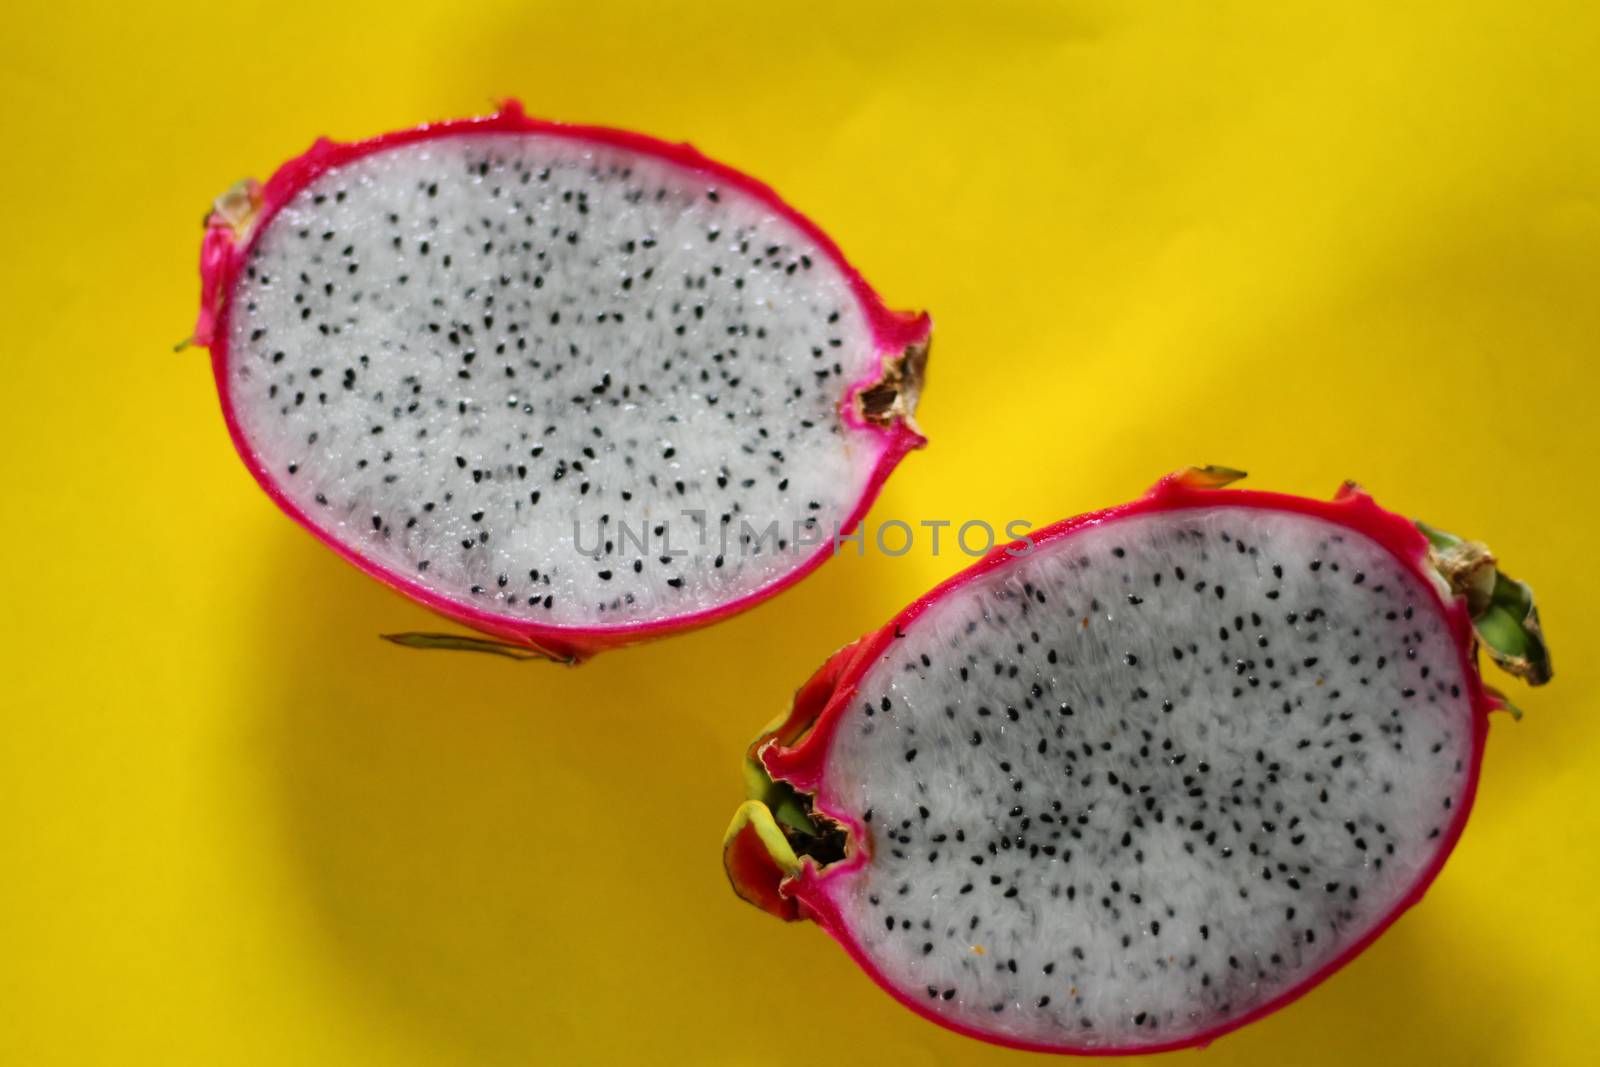 Fresh sliced dragonfruit or pitaya against a vibrant yellow background to show color contrast, freshness and abstract expression